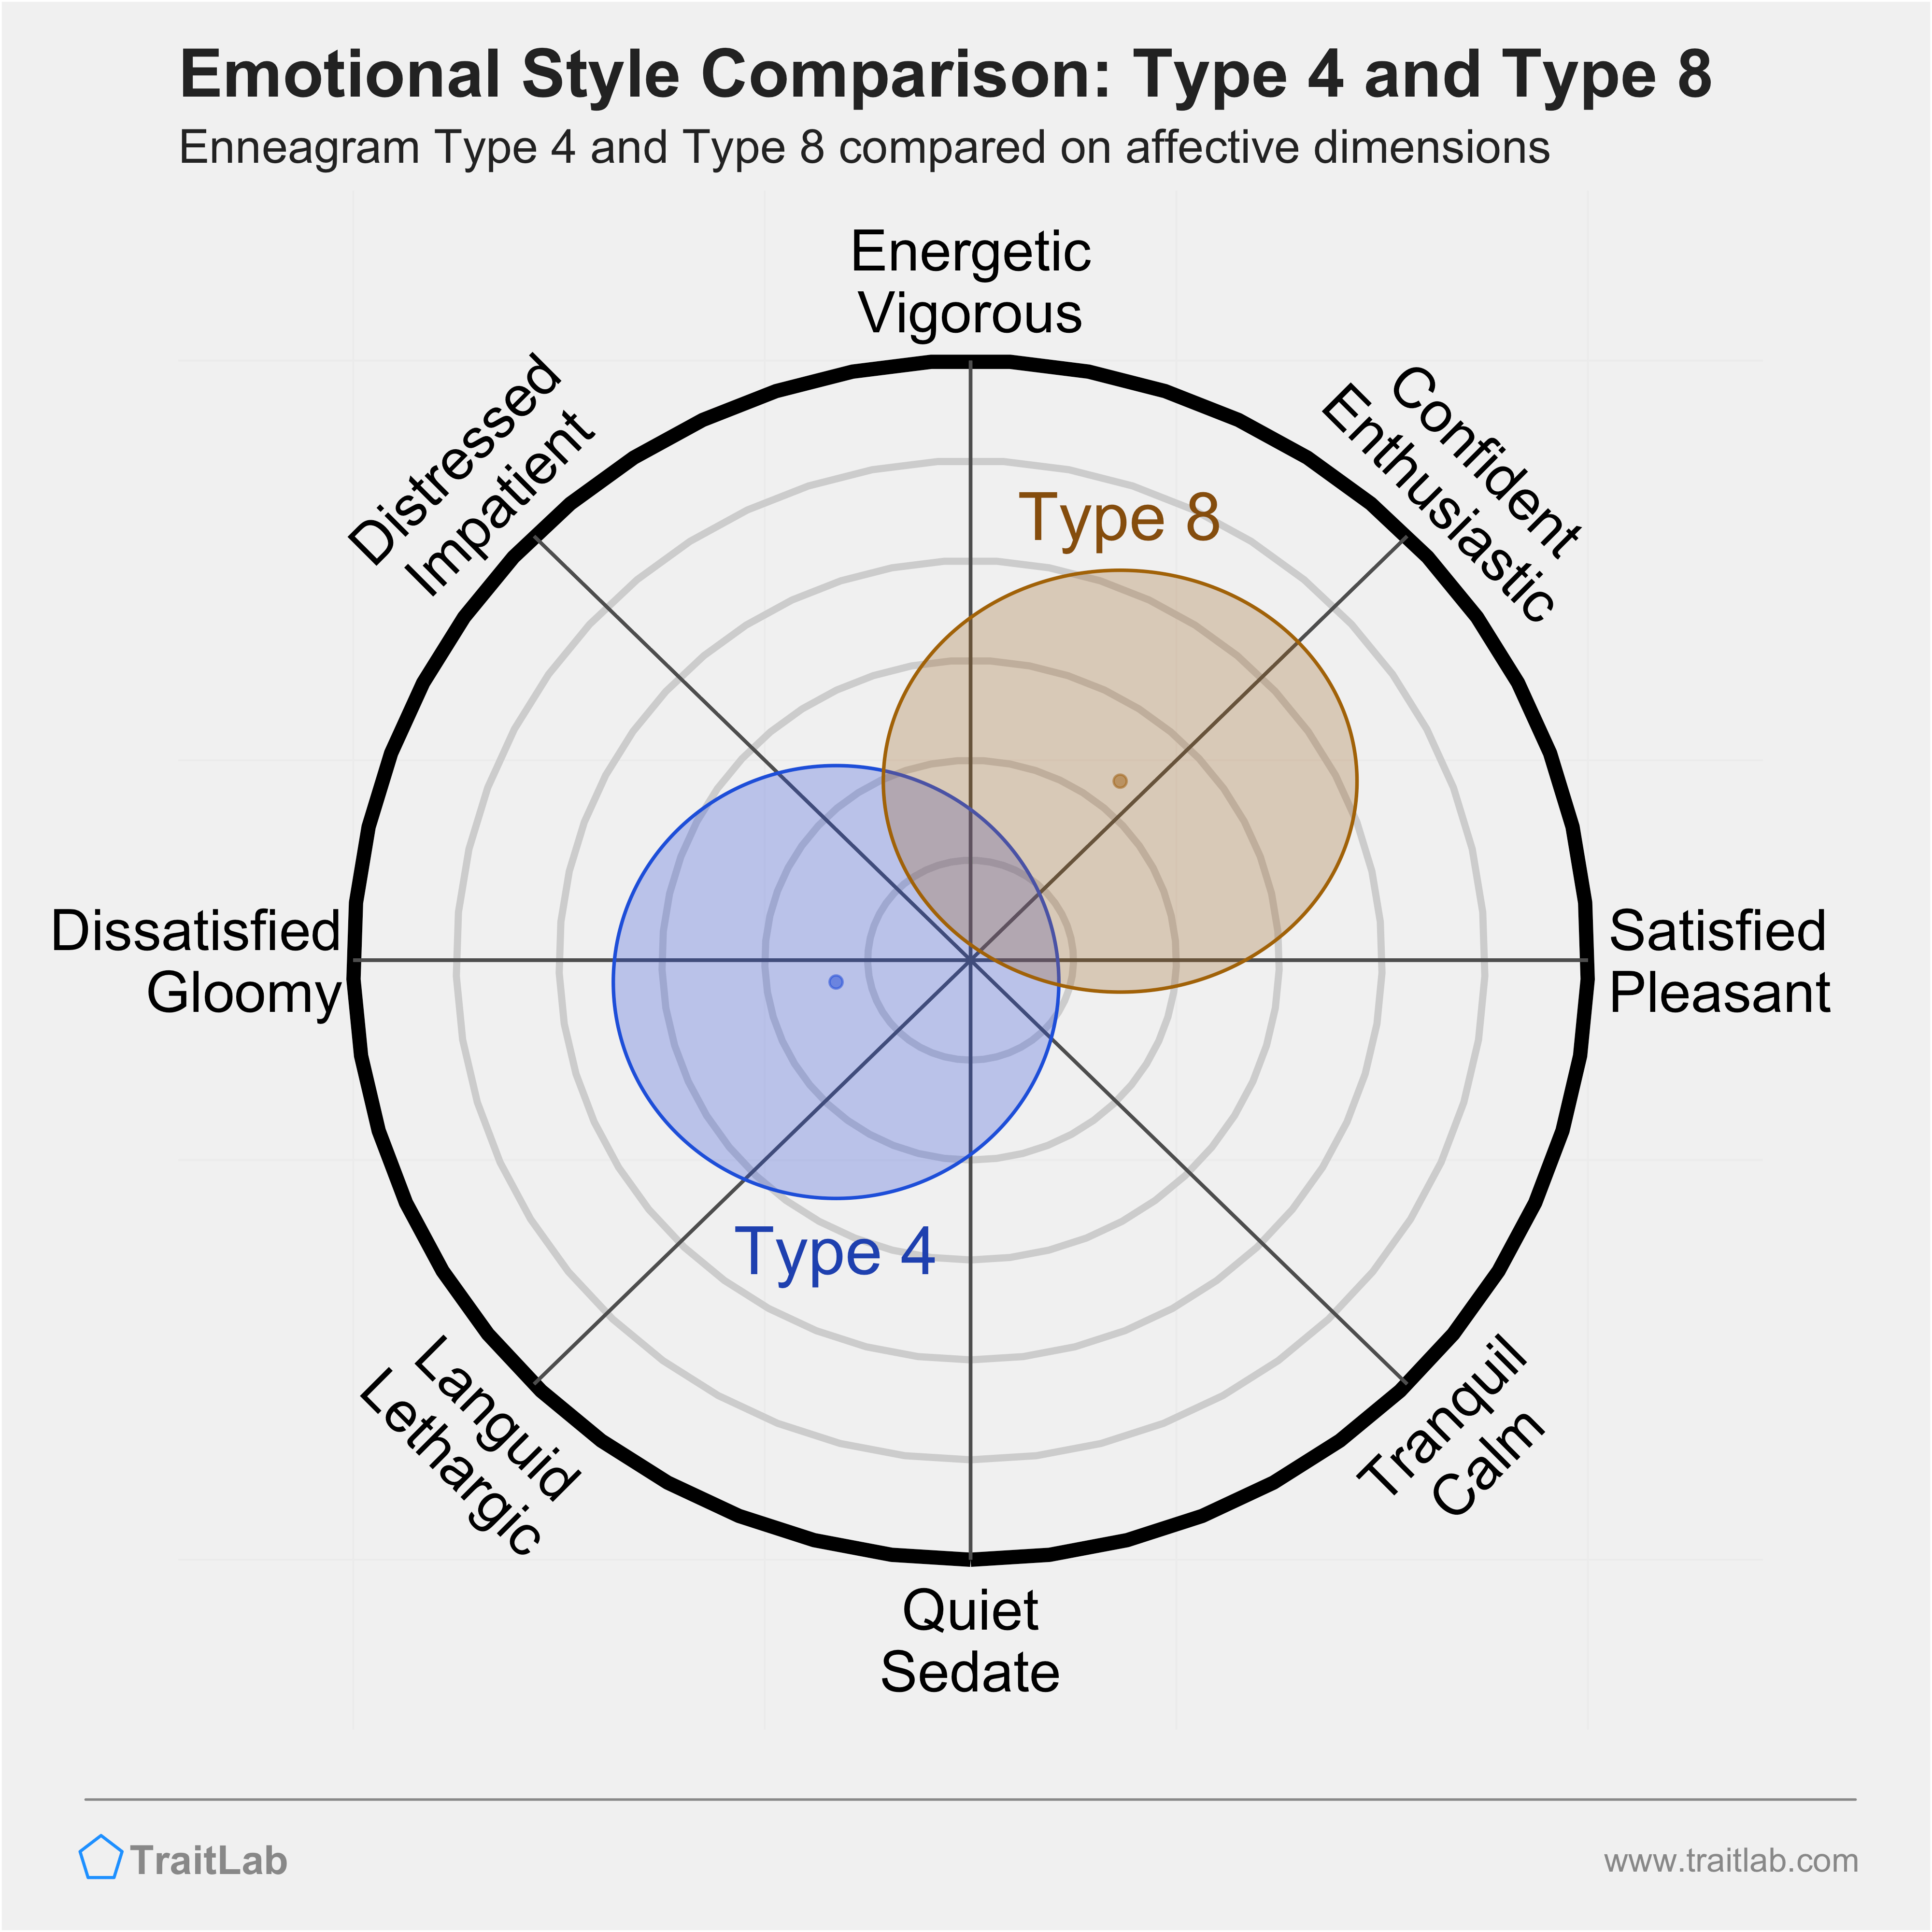 Type 4 and Type 8 comparison across emotional (affective) dimensions